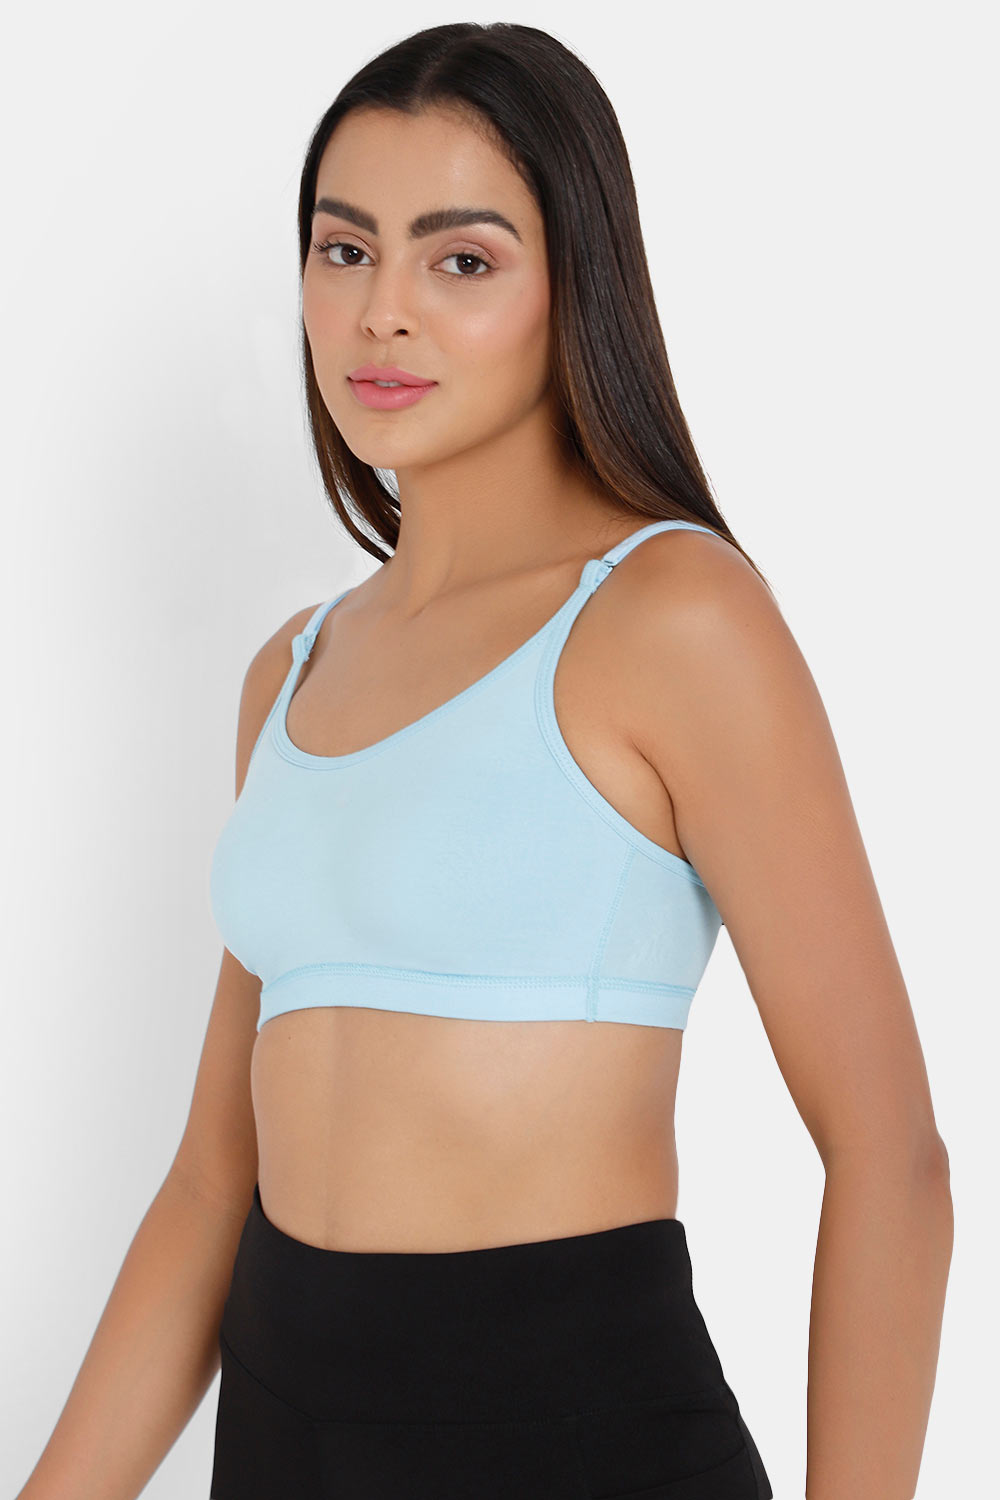 Intimacy Non- Wired Teenager Bra -  Light Blue